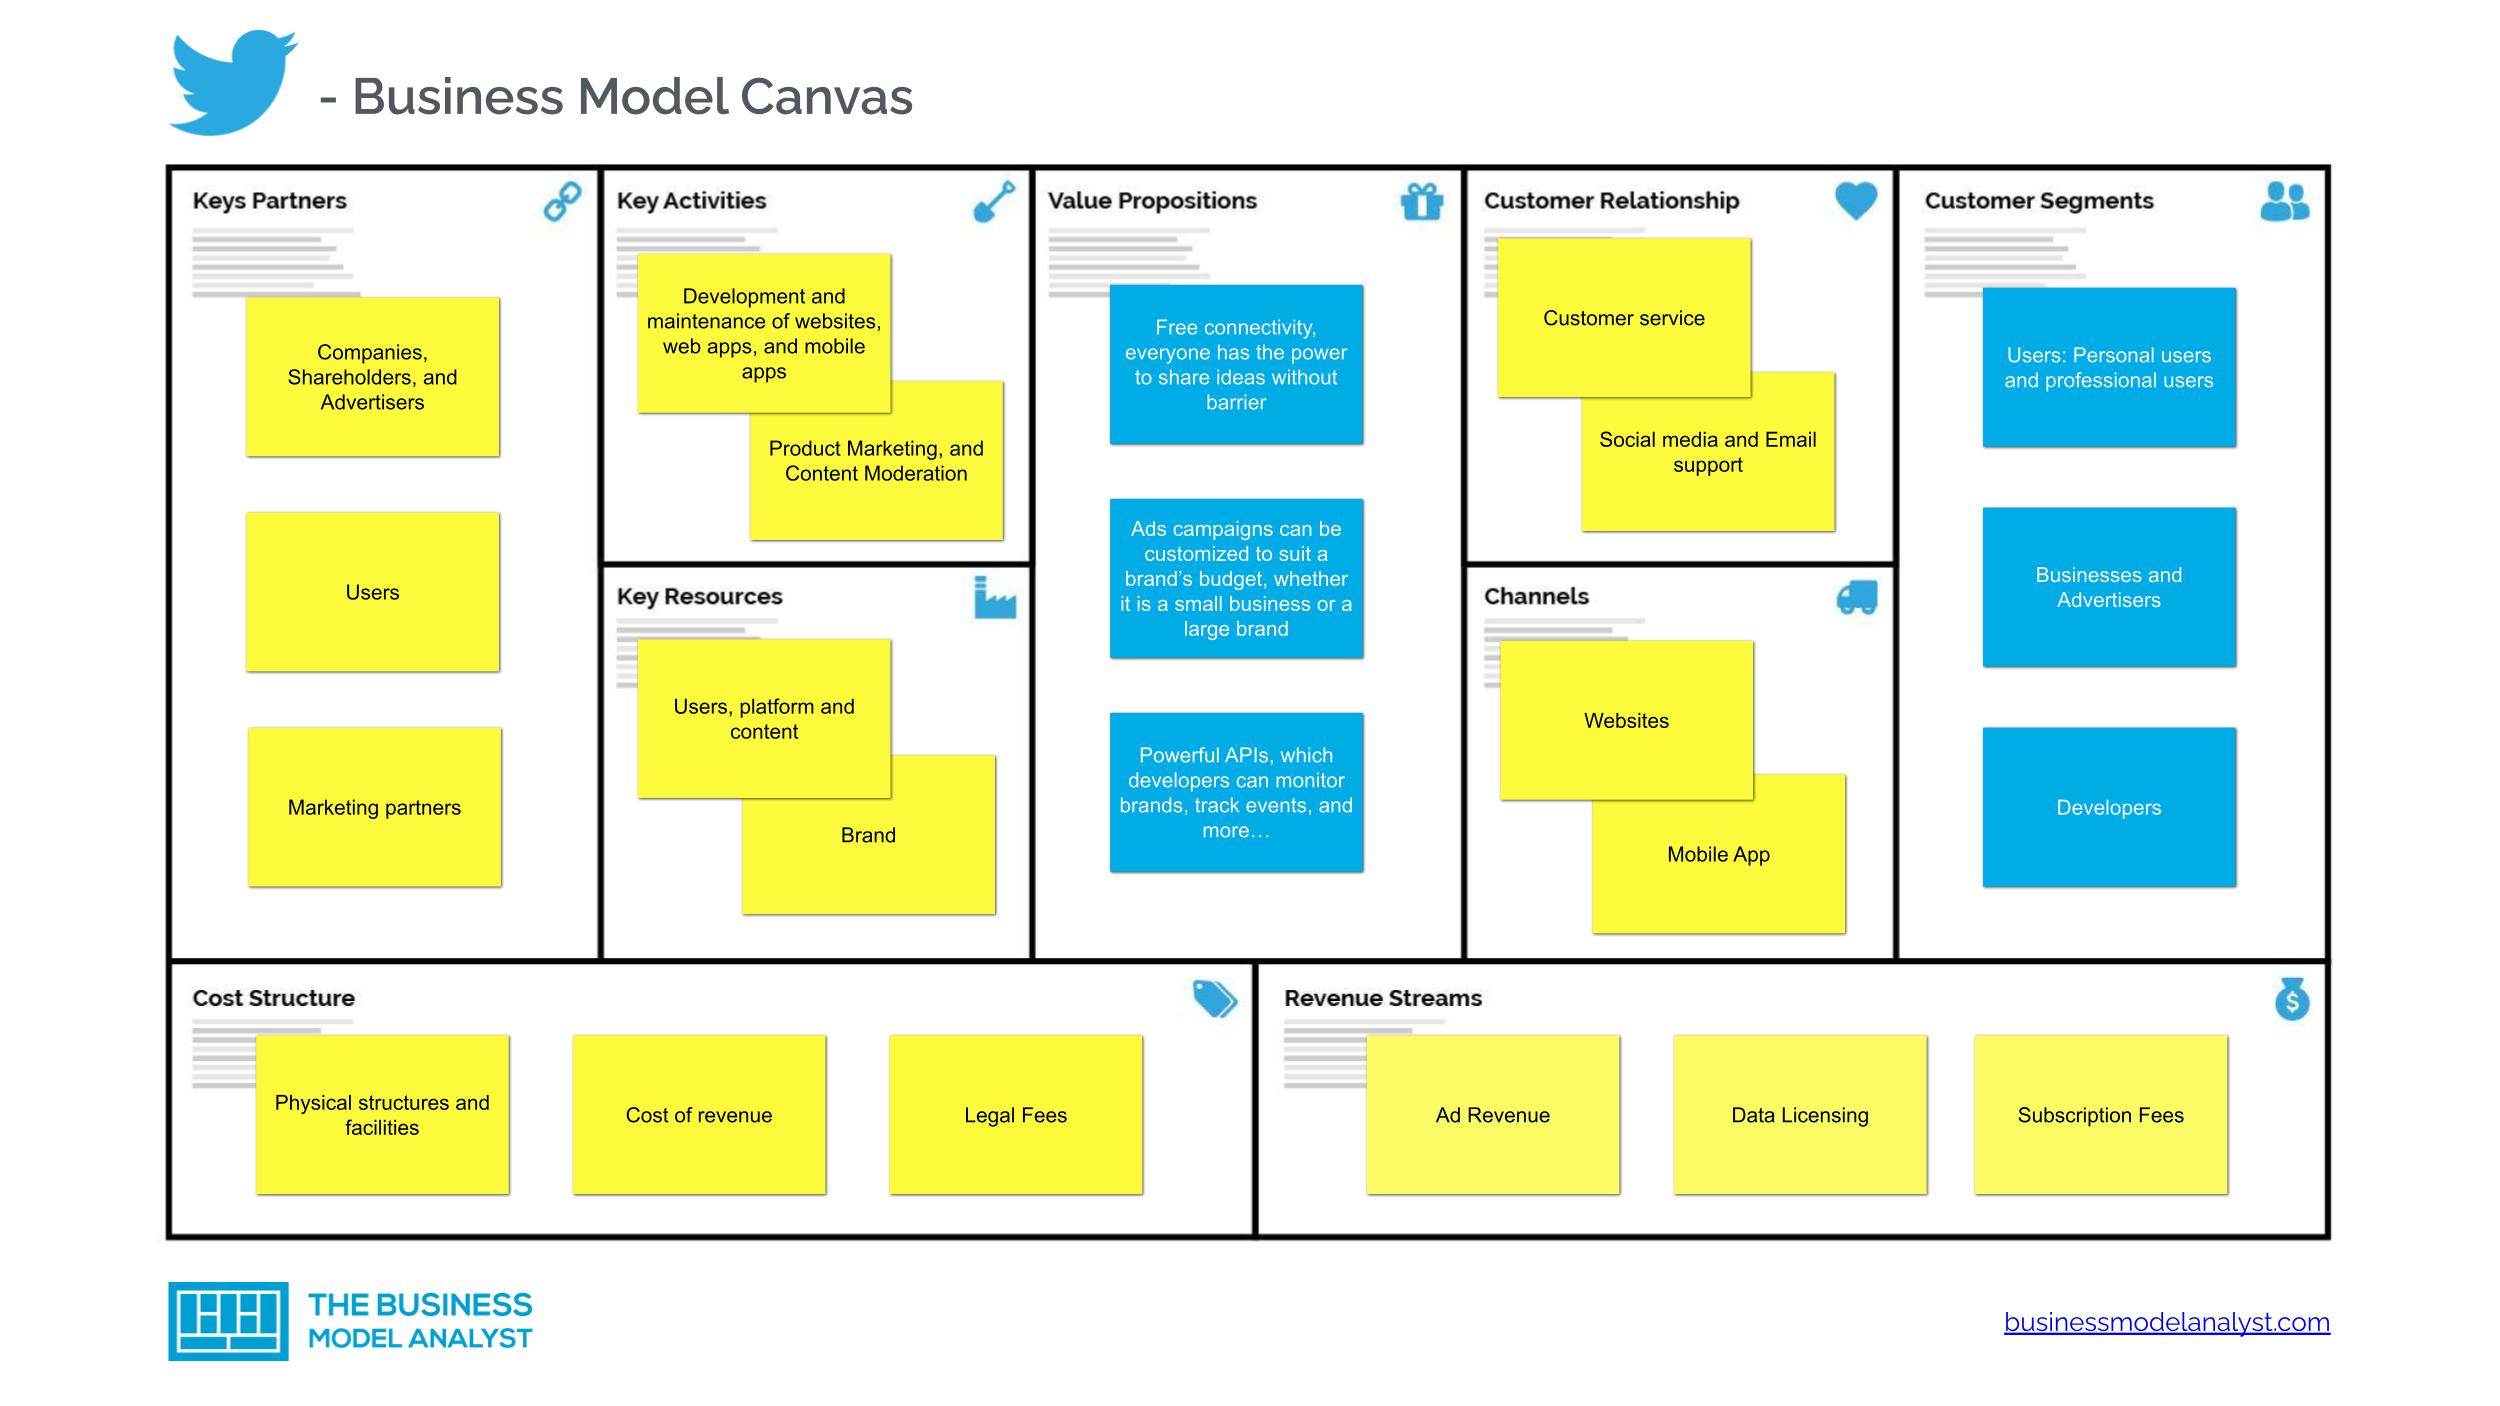 The Business Model Canvas: Does Your Business Measure Up?